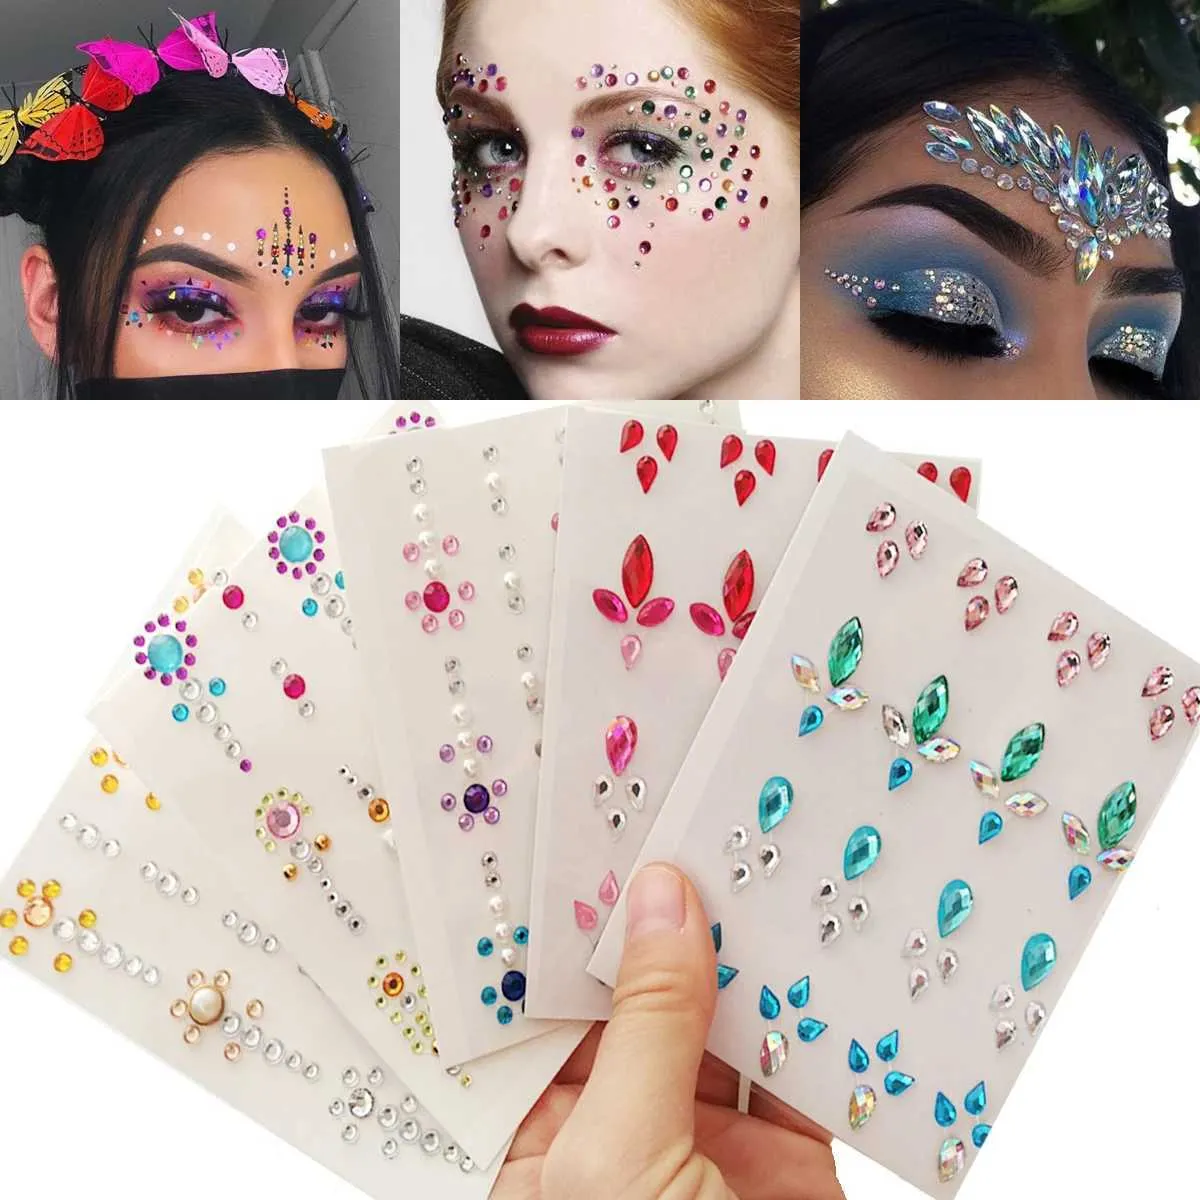 Tattoo Transfer 1pc Makeup Party Music Festival Stage Performance Face Jewels Stickers Eyes Body Art Diy 3D Simuled Pearl Tattoos 240427